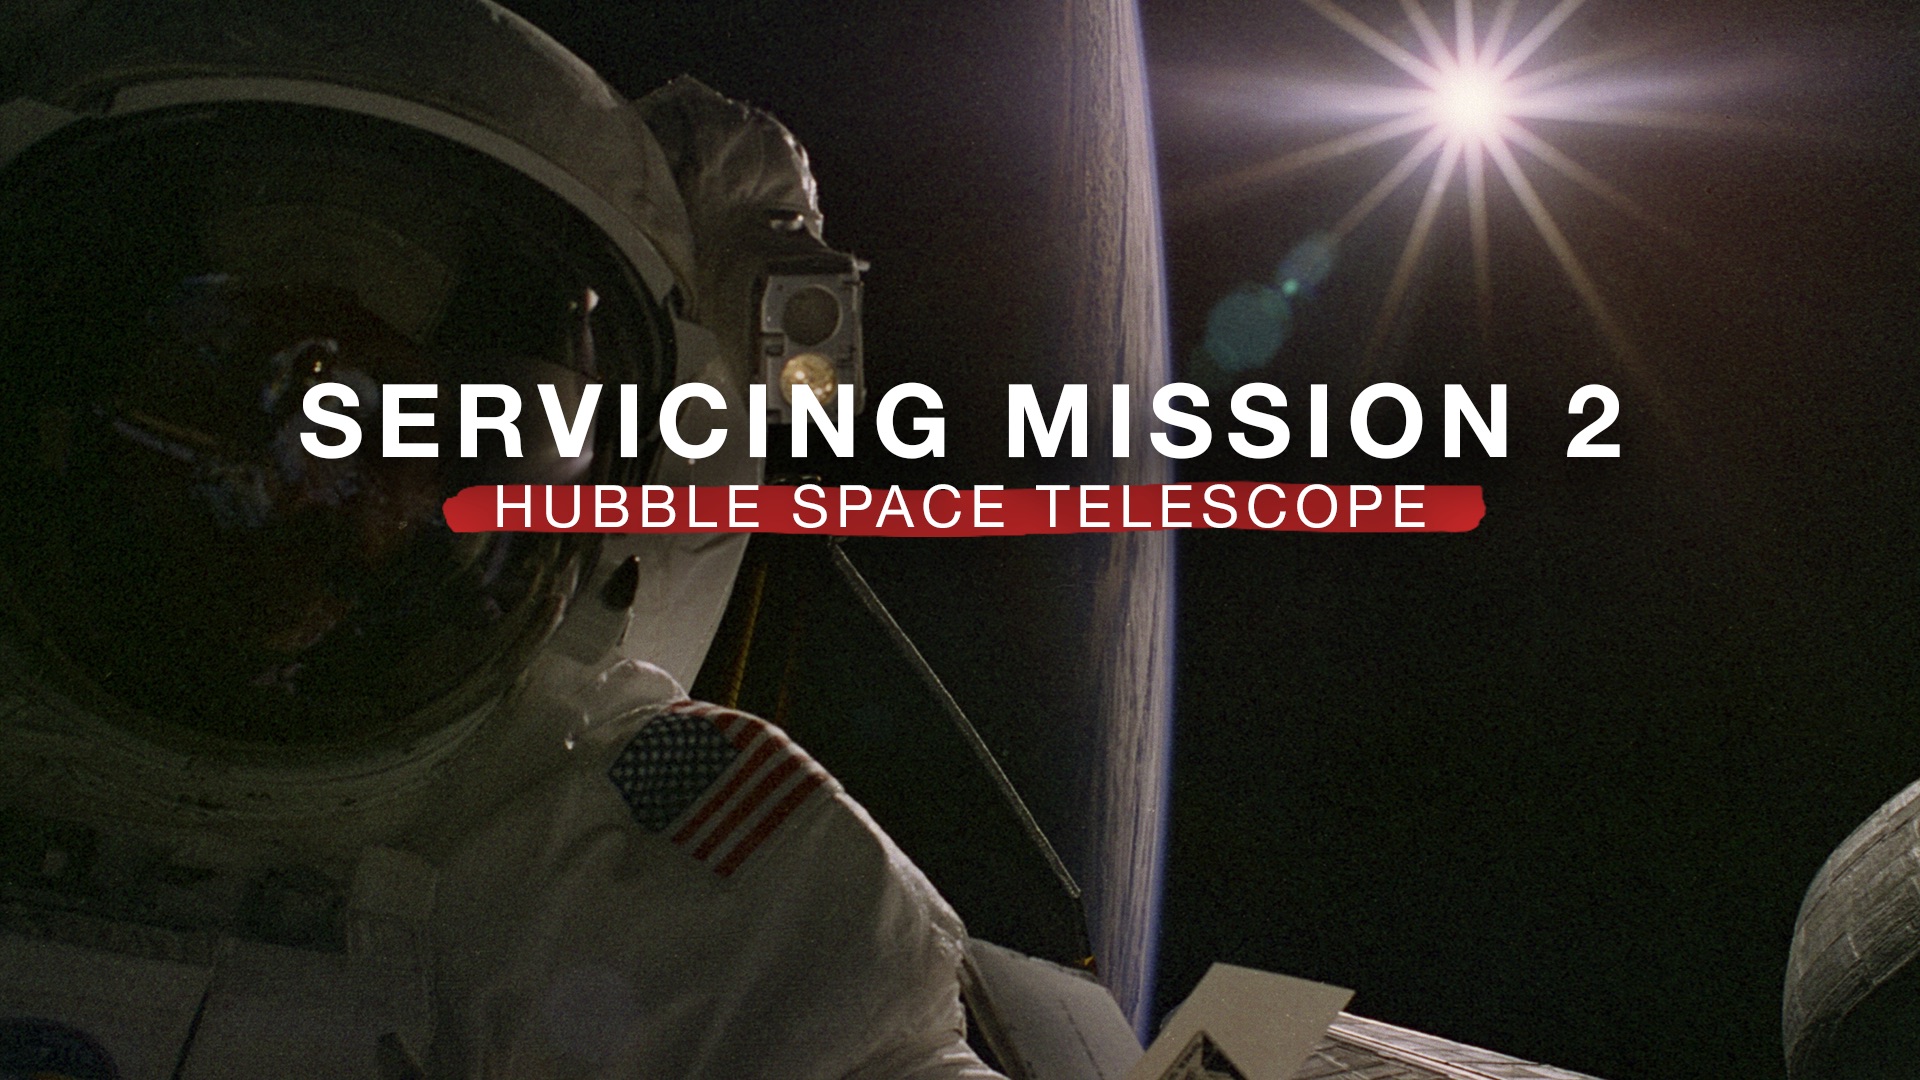 Preview Image for Hubble’s Servicing Mission 2